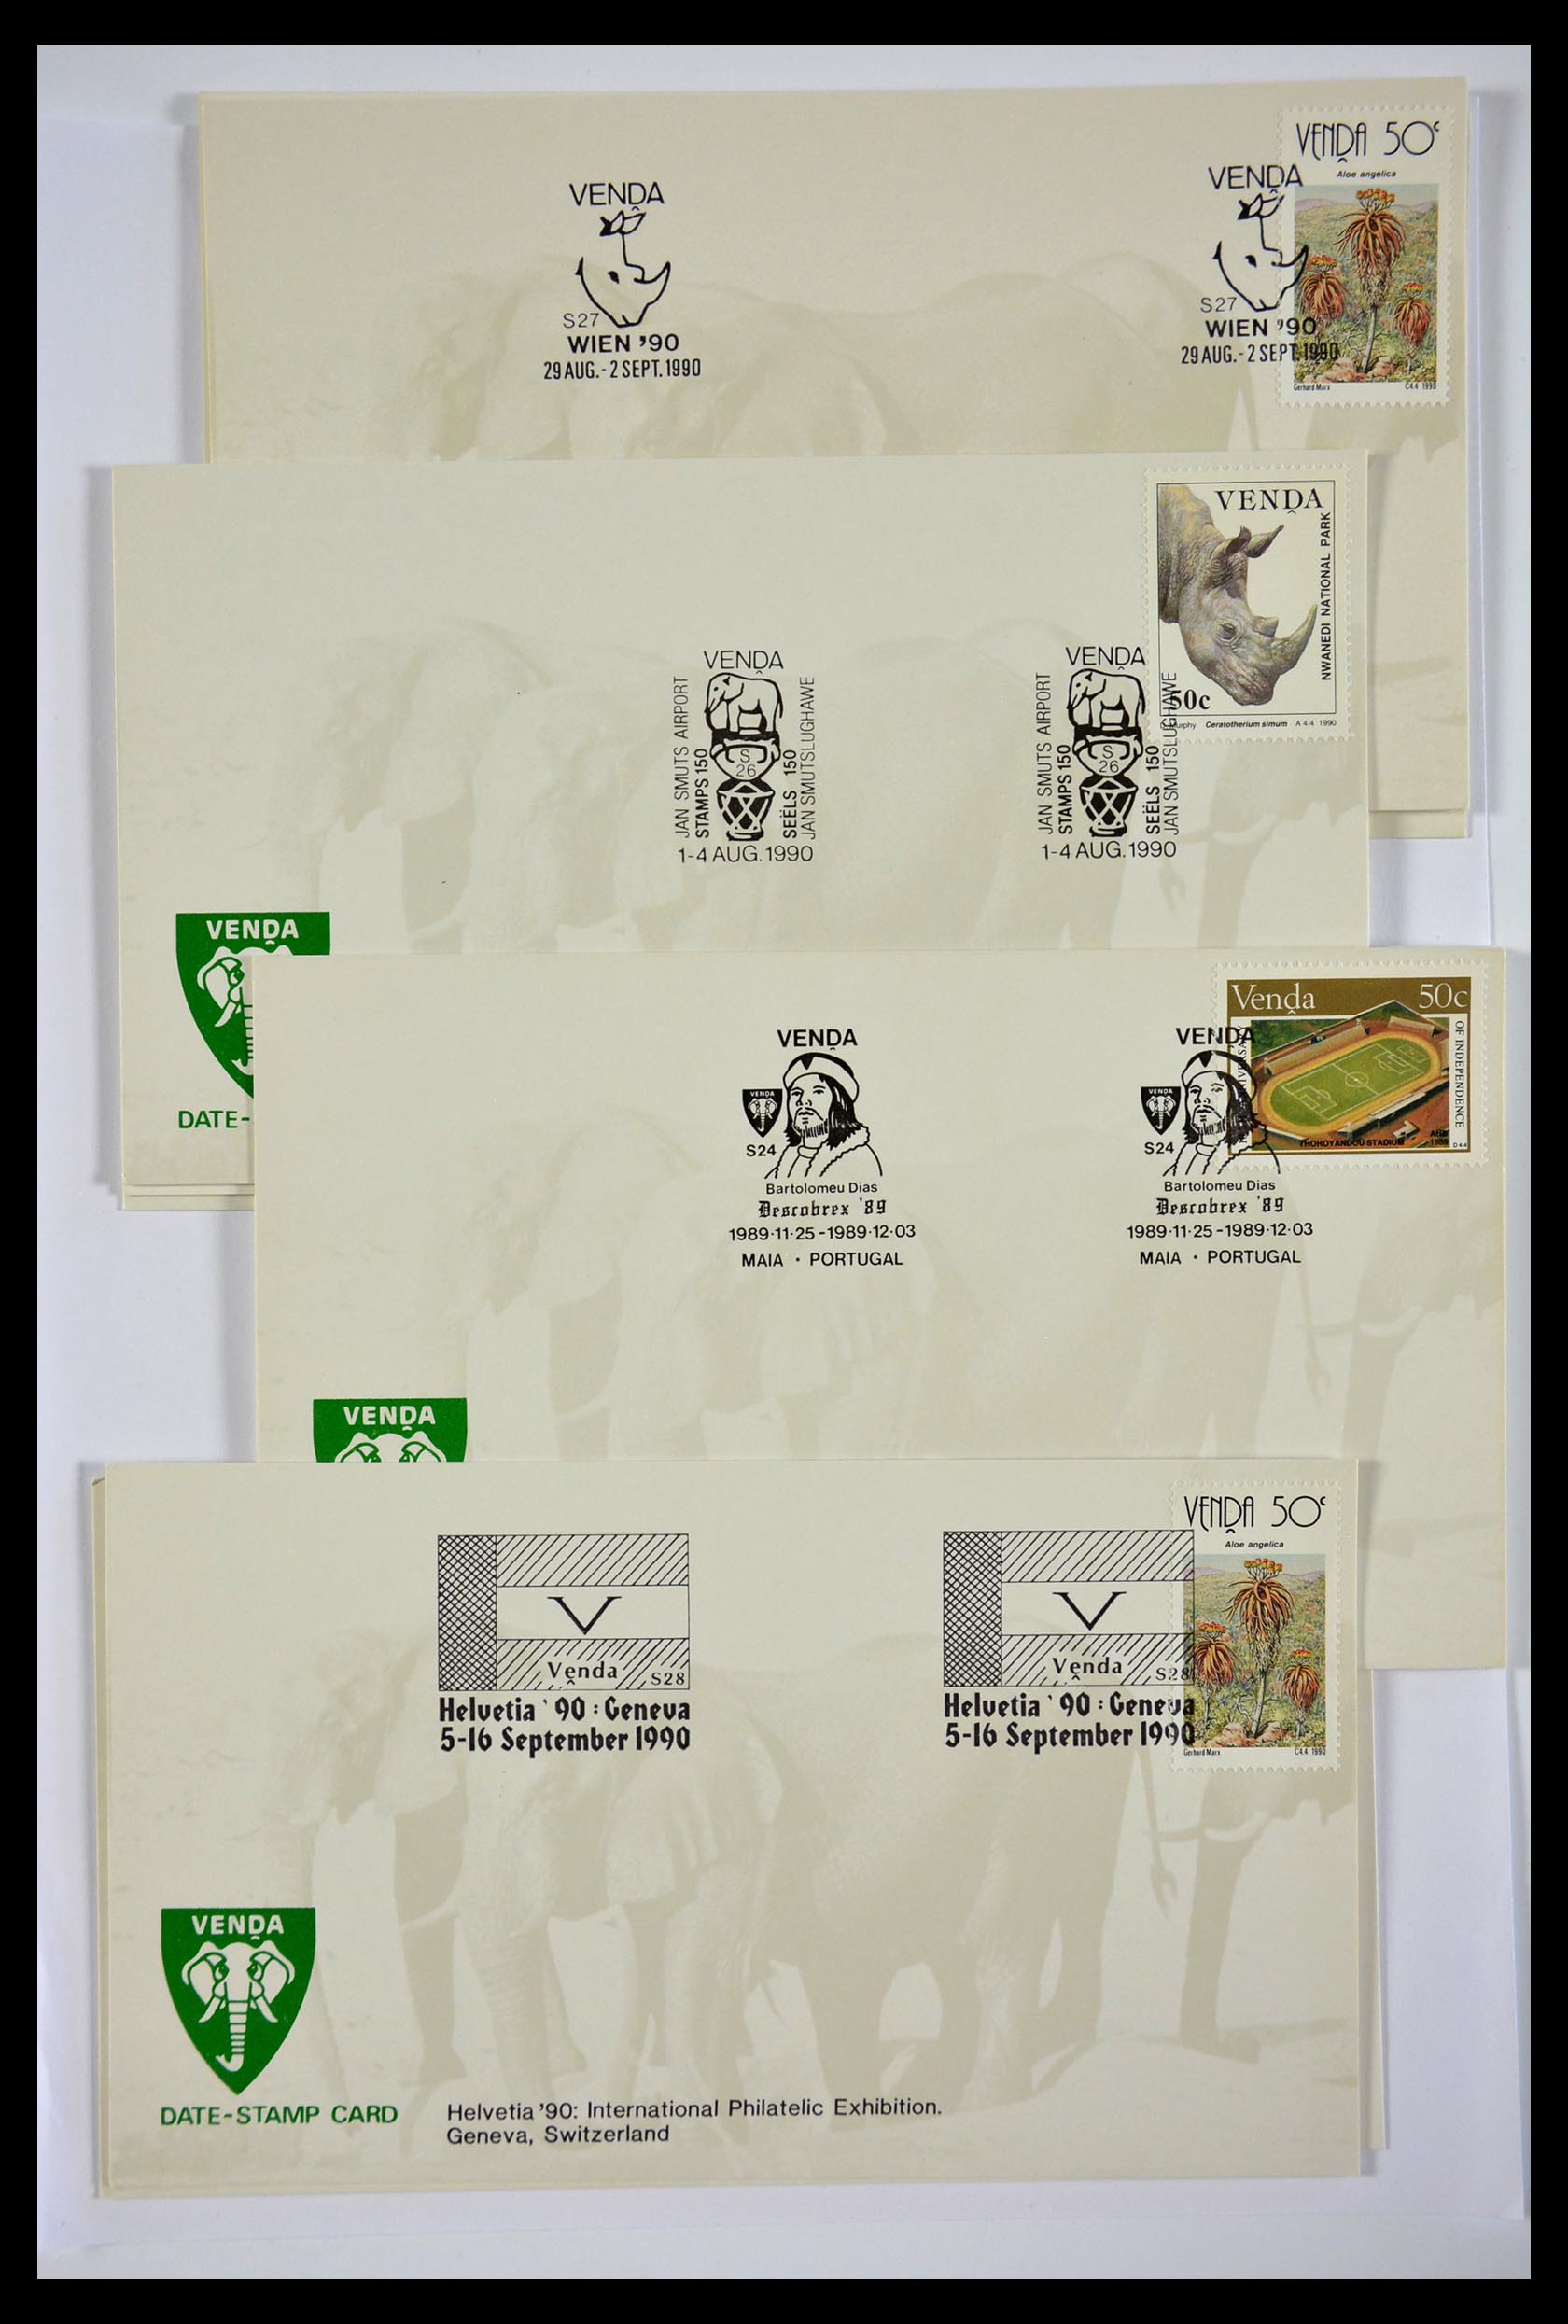 29356 567 - 29356 South Africa homelands first day covers 1979-1991.